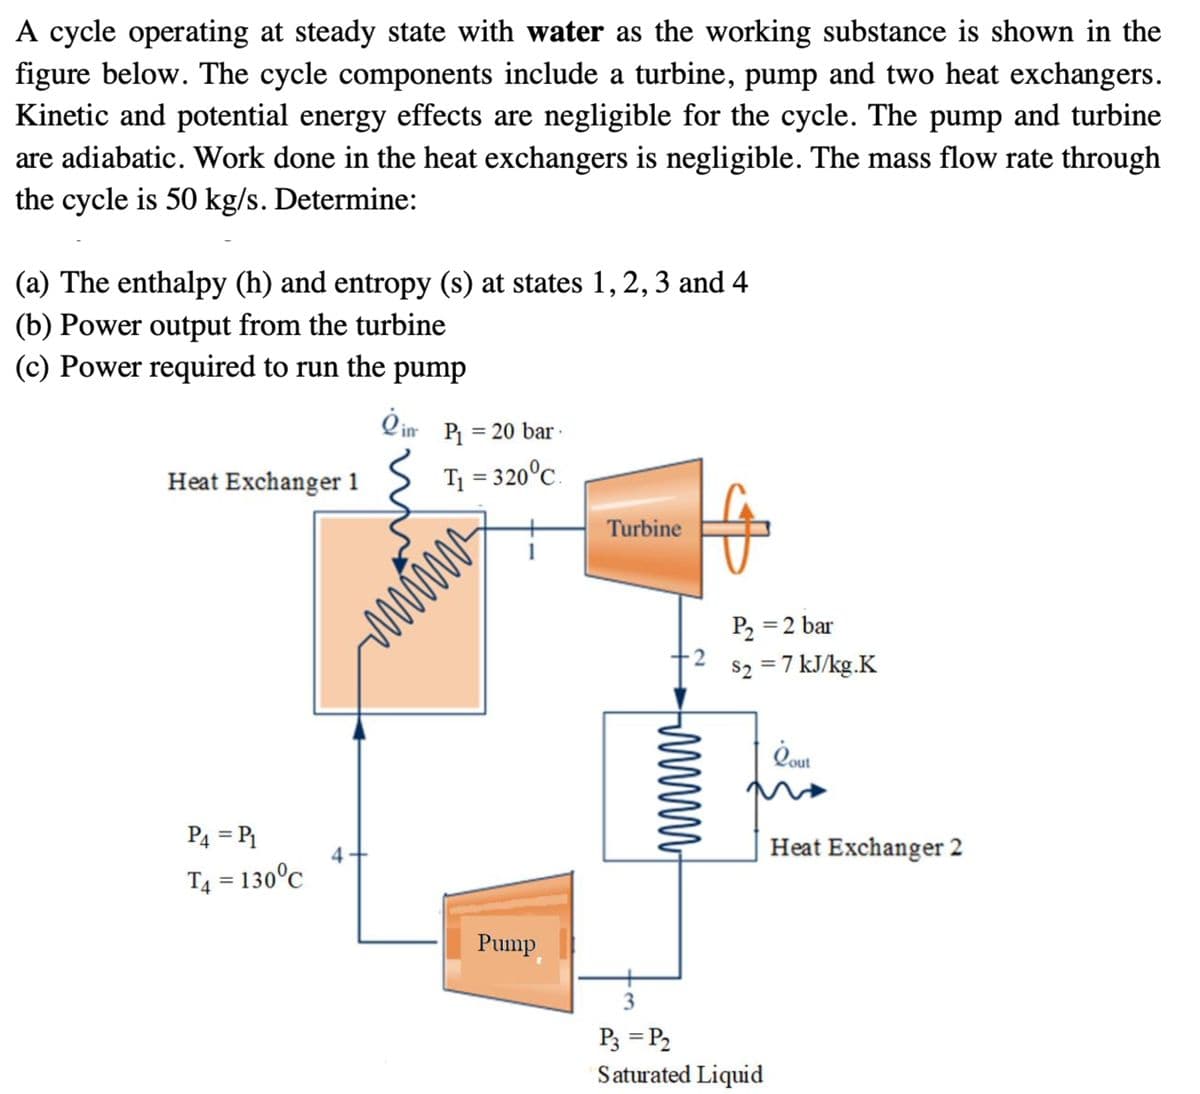 A cycle operating at steady state with water as the working substance is shown in the
figure below. The cycle components include a turbine, pump and two heat exchangers.
Kinetic and potential energy effects are negligible for the cycle. The pump and turbine
are adiabatic. Work done in the heat exchangers is negligible. The mass flow rate through
the cycle is 50 kg/s. Determine:
(a) The enthalpy (h) and entropy (s) at states 1,2, 3 and 4
(b) Power output from the turbine
(c) Power required to run the pump
Qim P = 20 bar ·
%3D
Heat Exchanger 1
T1 = 320°C.
Turbine
P, =2 bar
2
s2 = 7 kJ/kg.K
Oout
P4 = P
Heat Exchanger 2
T4 = 130°C
Pump
3
P3 = P2
Saturated Liquid
www
